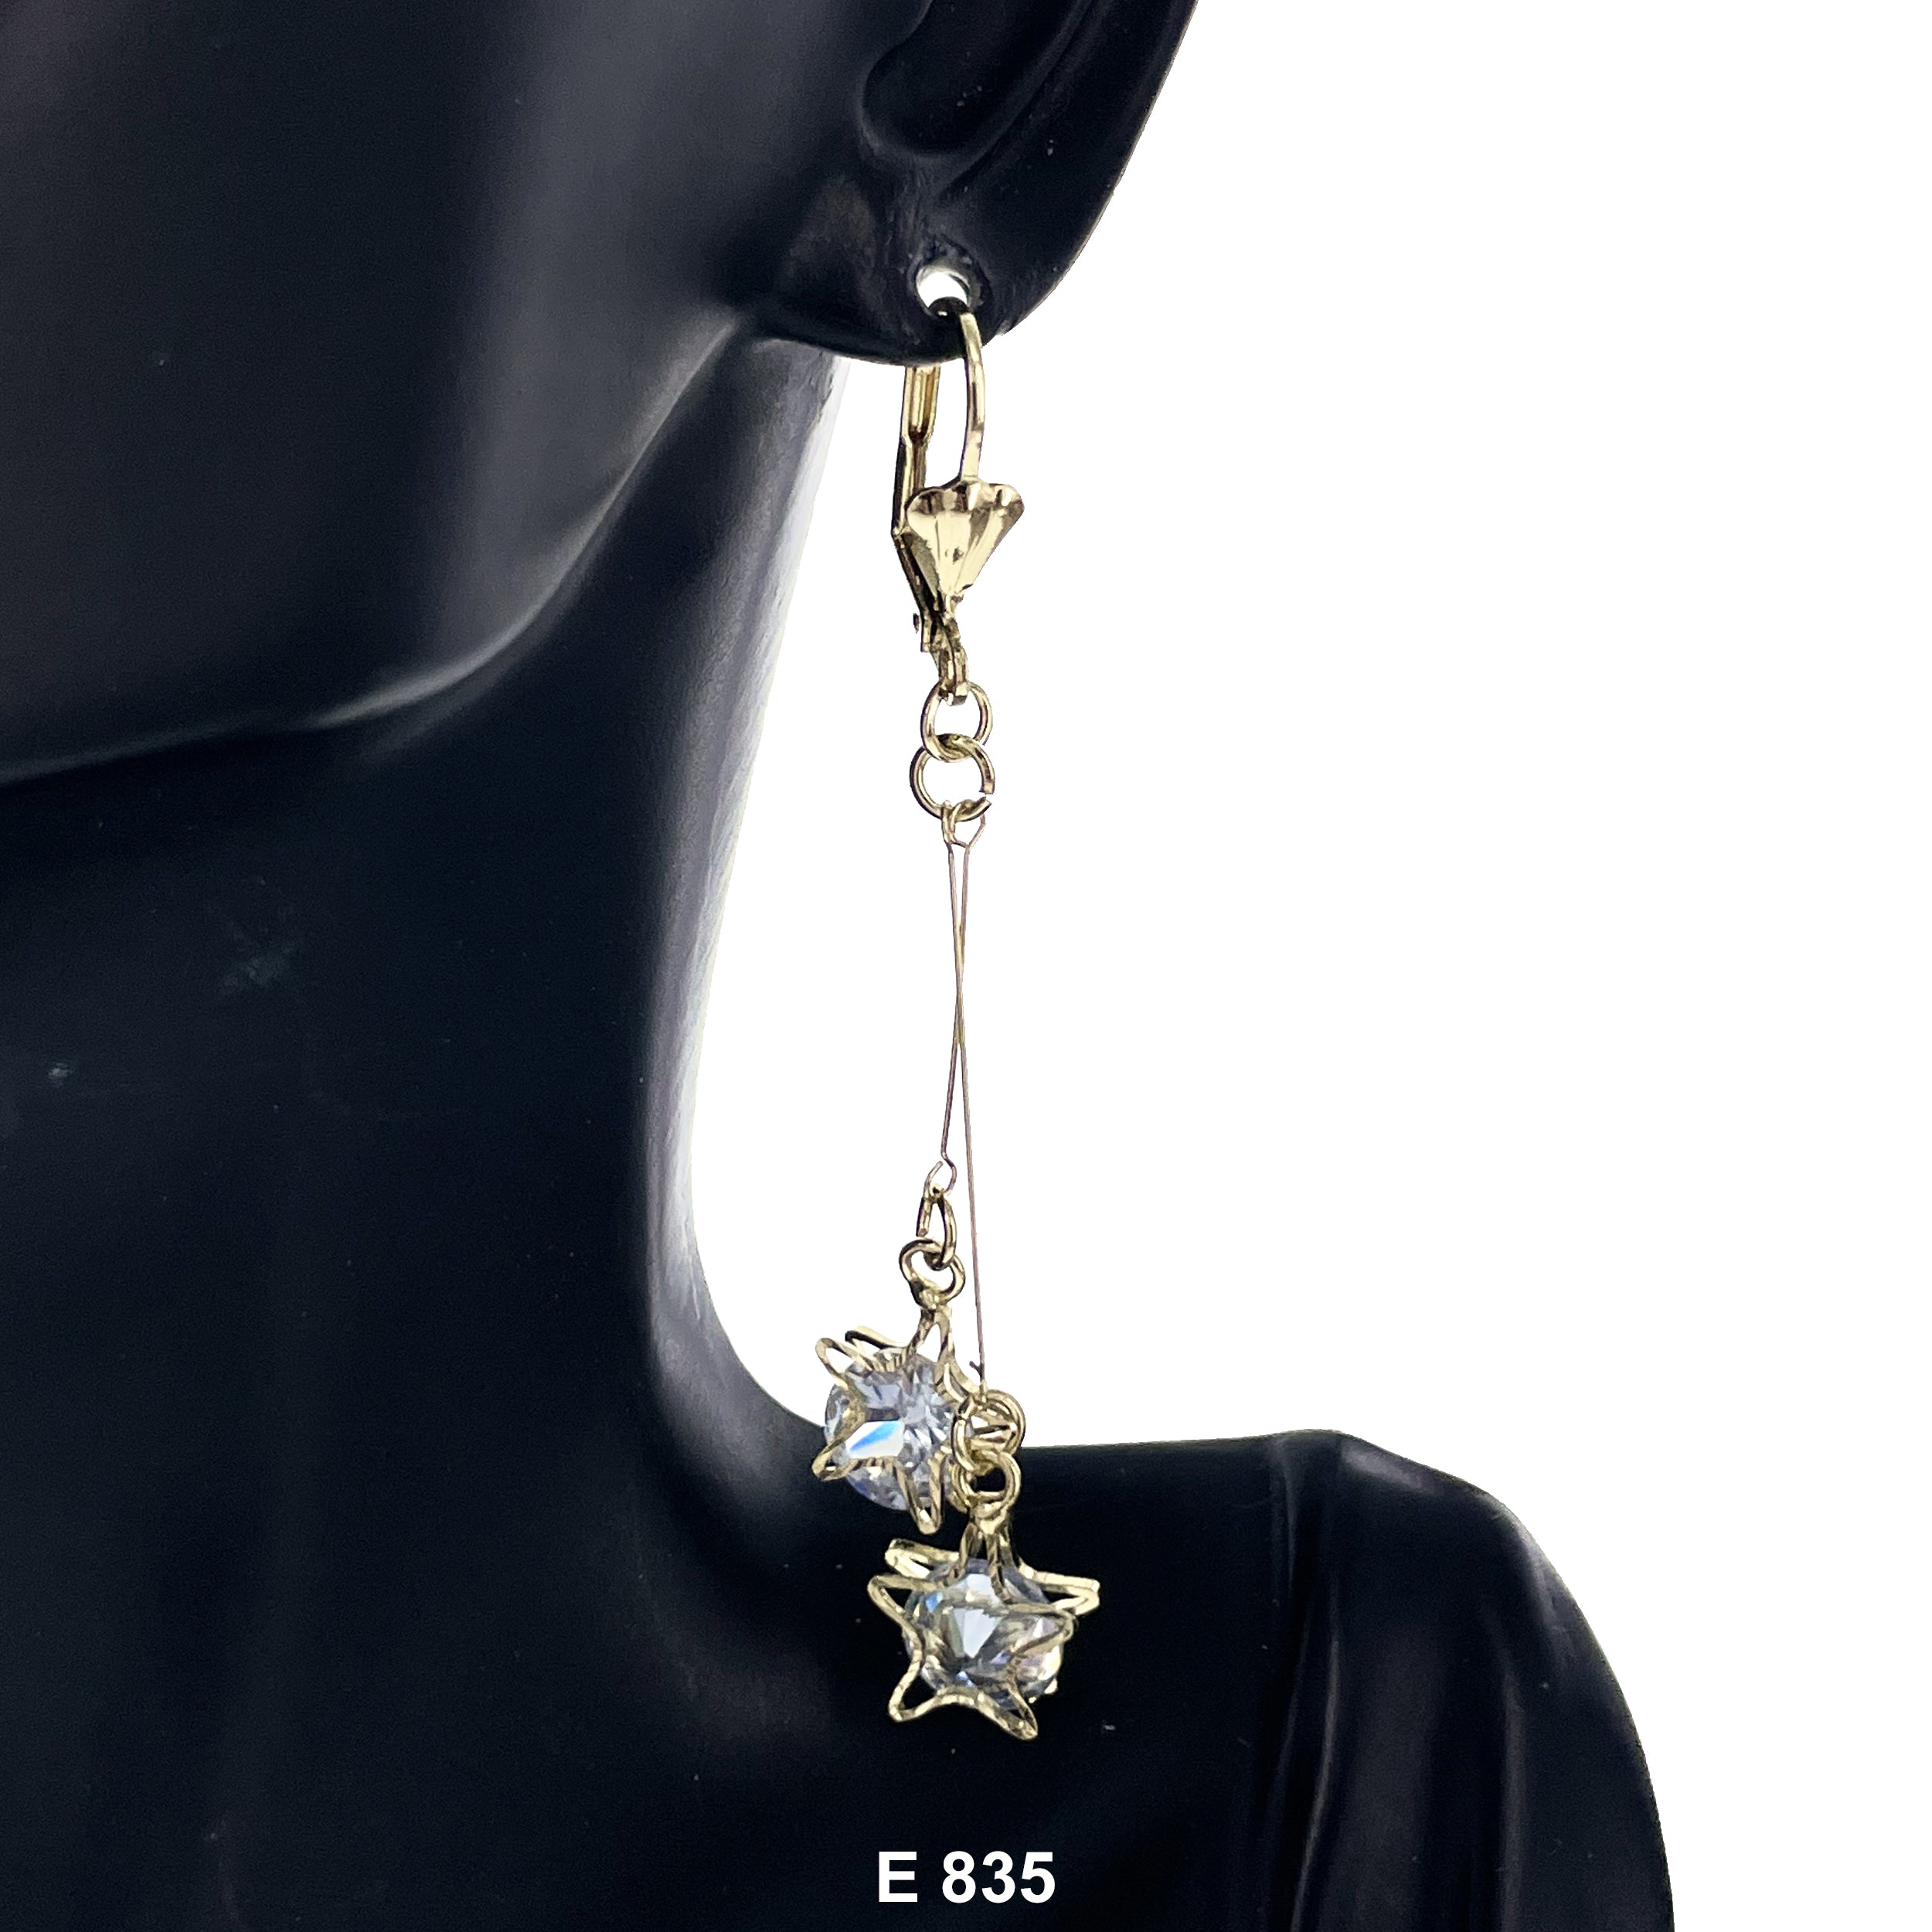 Duck Paw Hanging Star Stoned Earring E 835